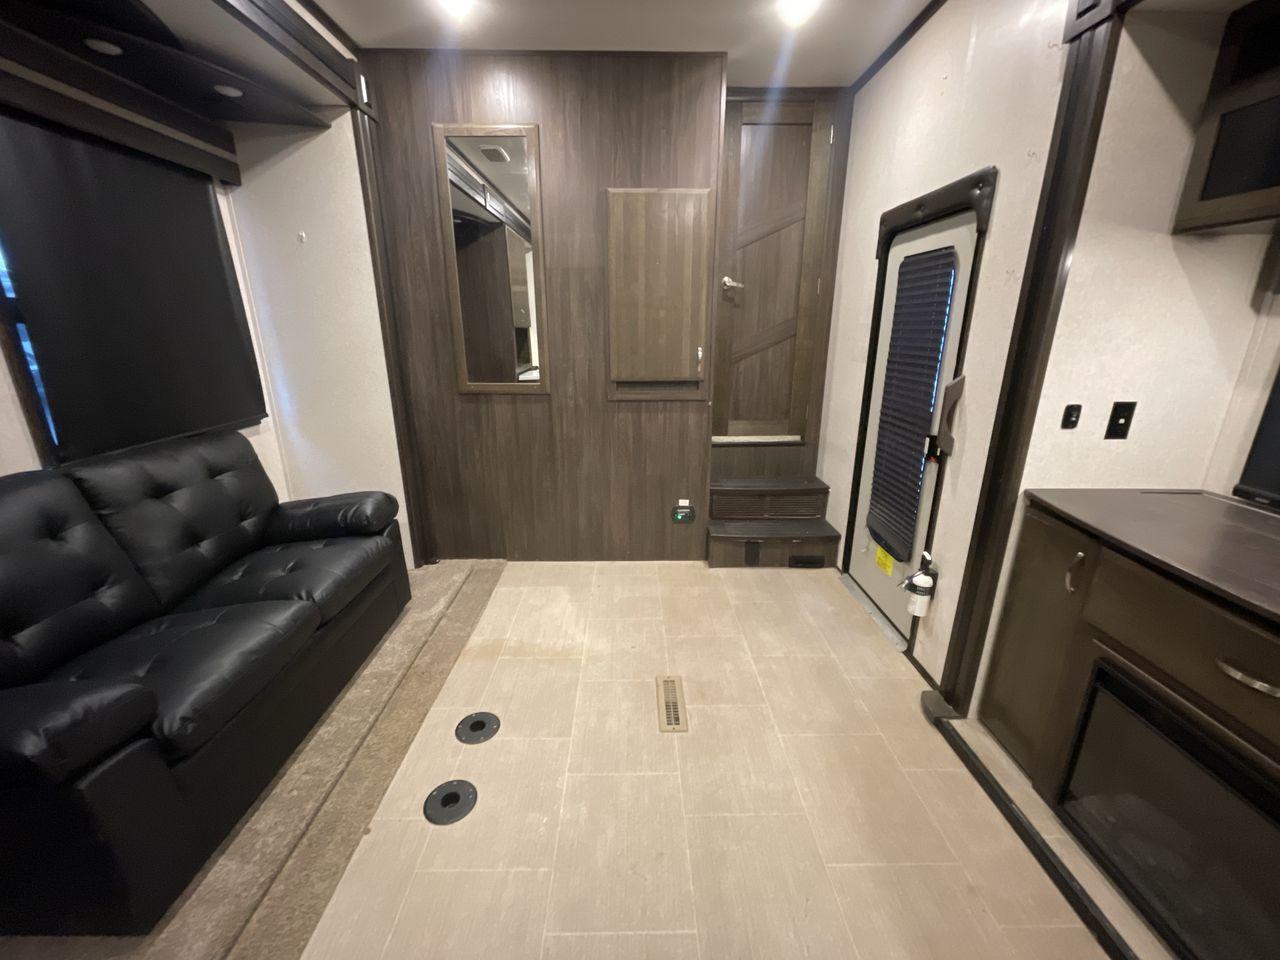 2018 GRAY JAYCO SEISMIC 4250 - (1UJCJSCV5J1) , Length: 44.92 ft. | Dry Weight: 15,570 lbs. | Gross Weight: 20,000 lbs. | Slides: 3 transmission, located at 4319 N Main St, Cleburne, TX, 76033, (817) 678-5133, 32.385960, -97.391212 - Set out to the great outdoors in this 2018 Jayco Seismic 4250 and enjoy all the amenities it has to offer! This toy hauler measures just a bit under 45 ft. in length and 13.32 ft. in height, providing great space and comfort. It has a dry weight of 15,570 lbs. and a GVWR of 20,000 lbs. It also comes - Photo #11